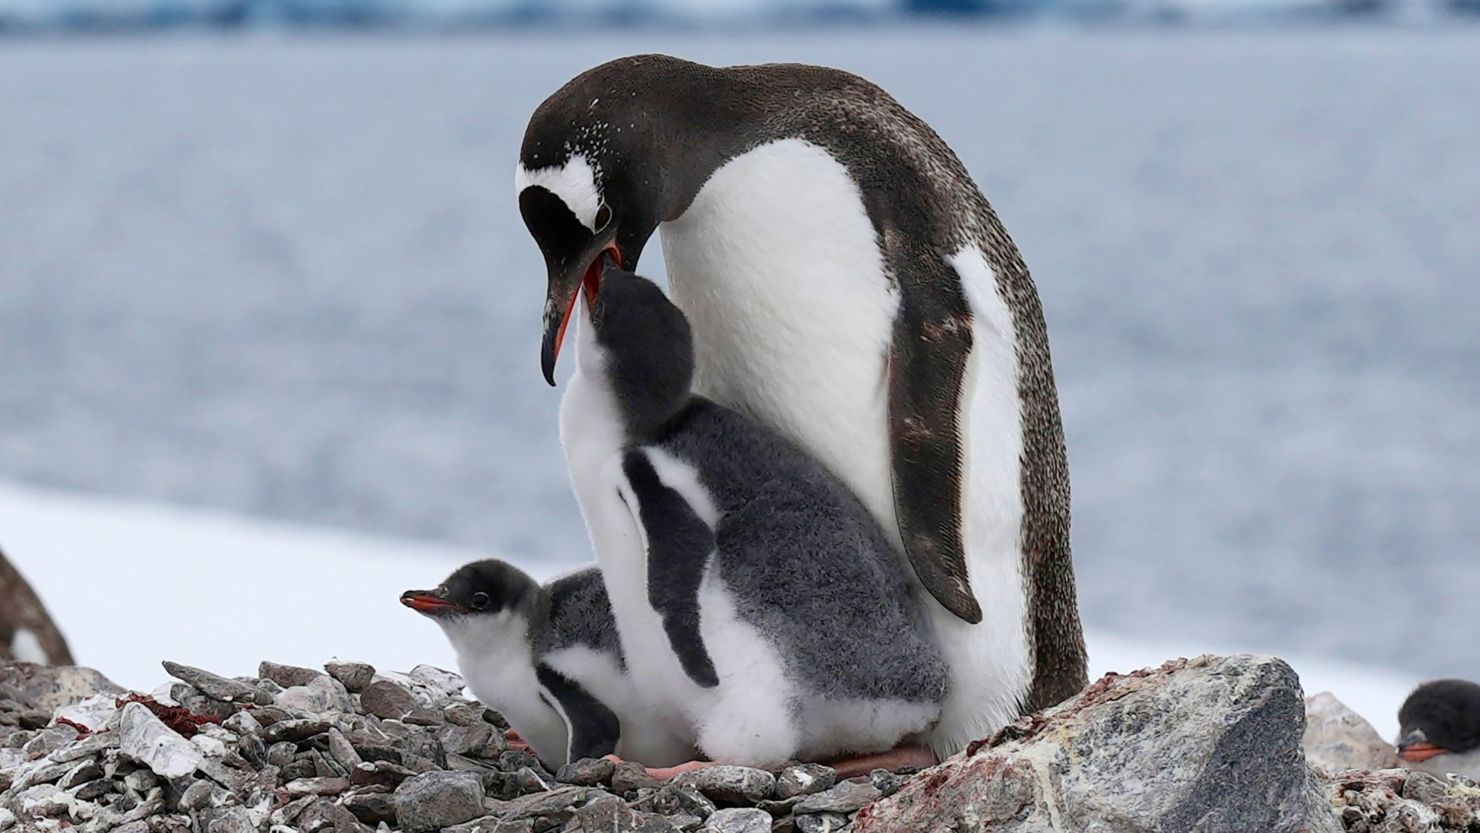 Penguins feed mainly on Antarctic krill, a shrimp-like crustacean that thrives on the kind of phytoplankton found under sea ice.